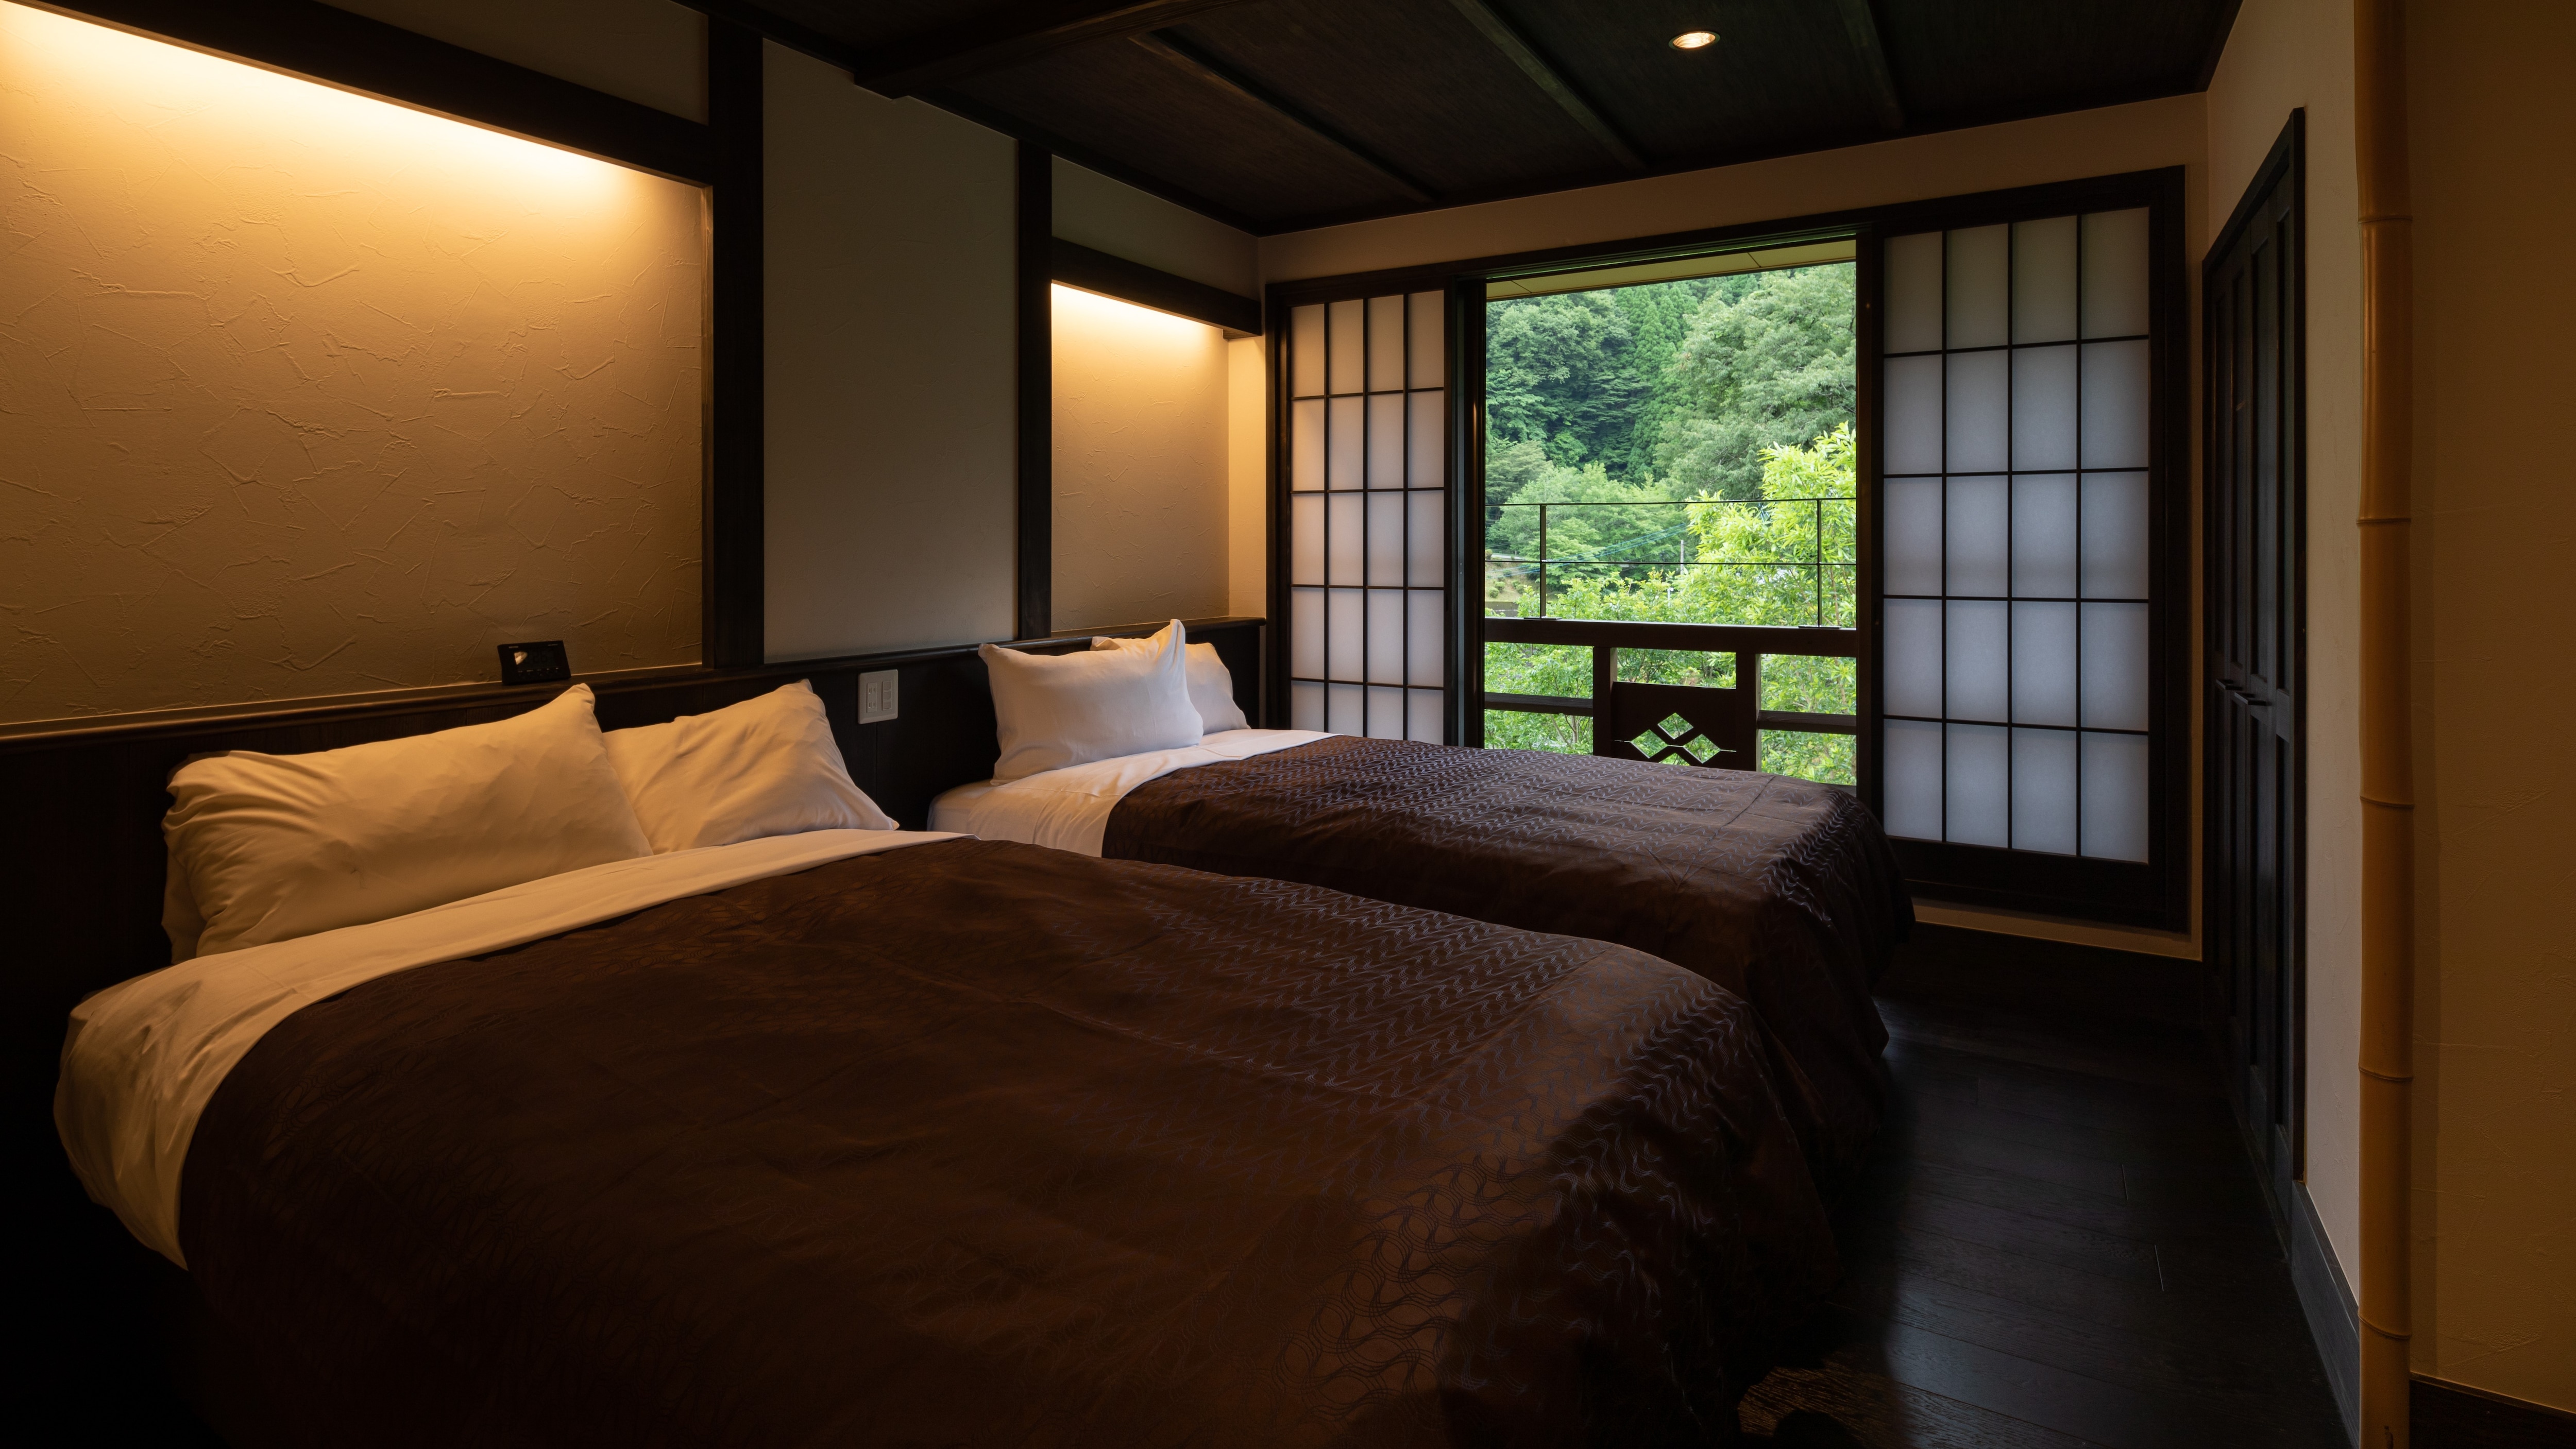 An example of Japanese and Western room II. This type has 3 rooms.